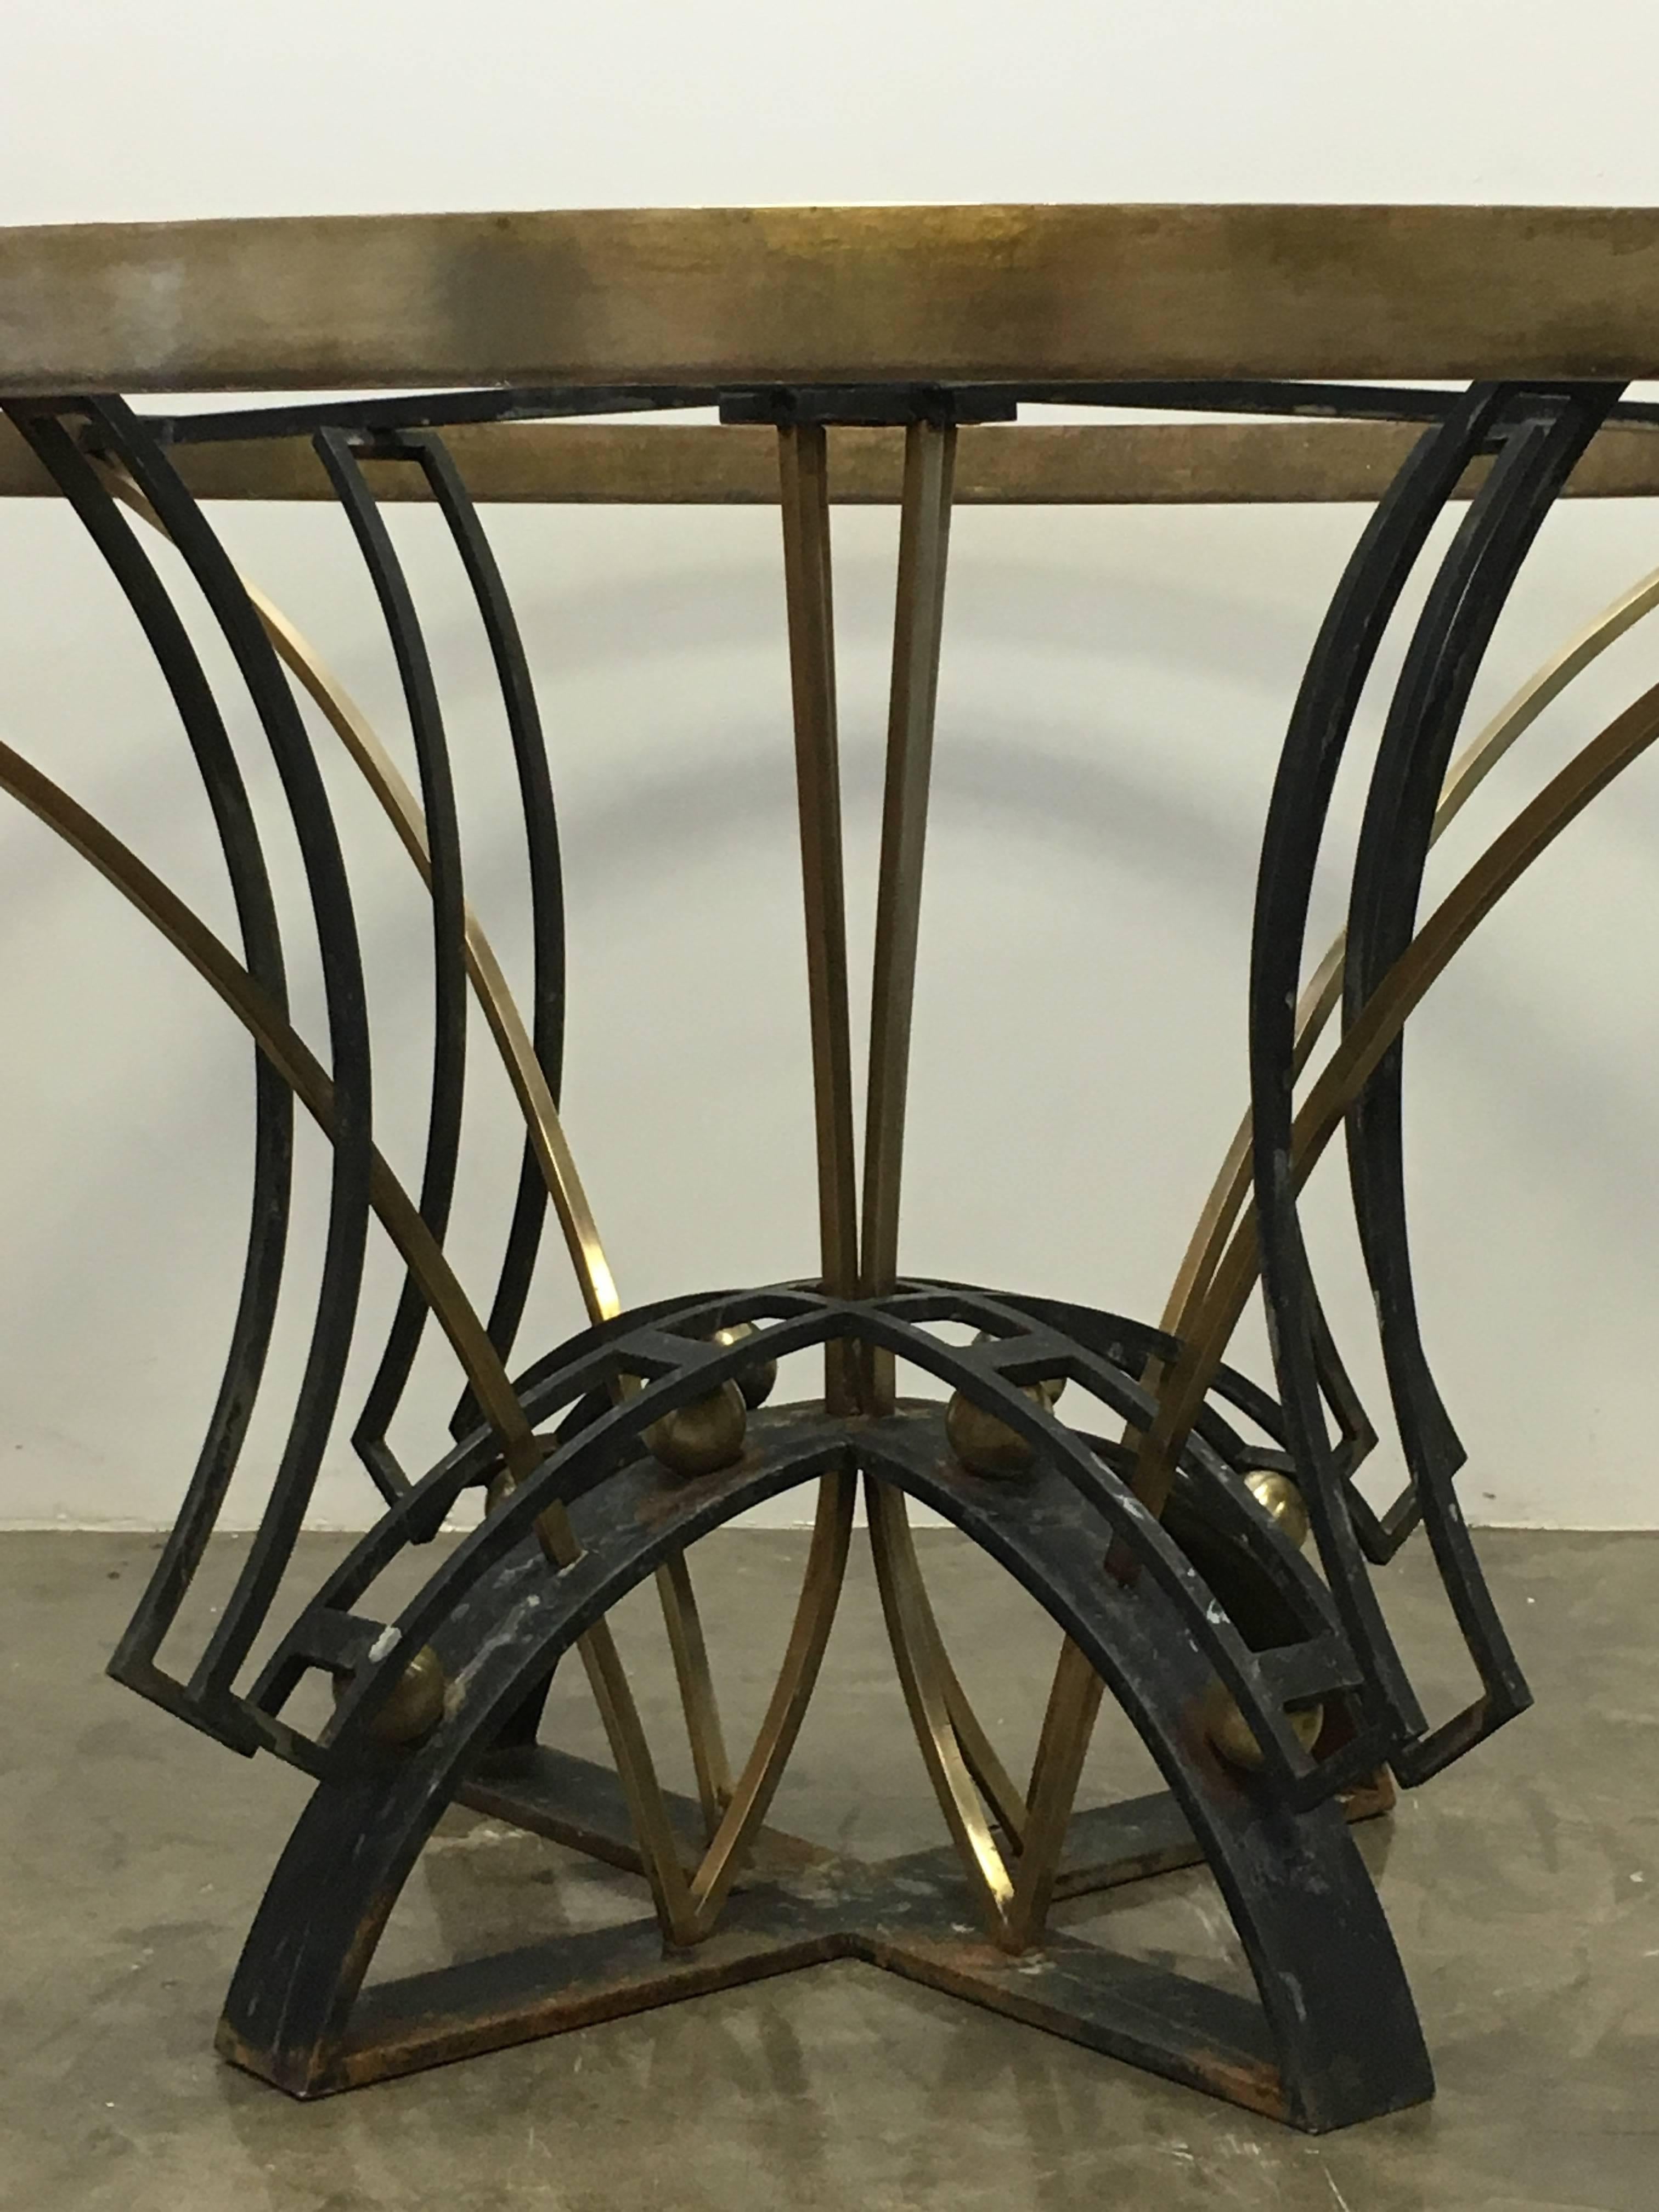 Superb Iron and Brass Round Dining Table by Arturo Pani, Mexico City circa 1950s In Good Condition For Sale In San Diego, CA